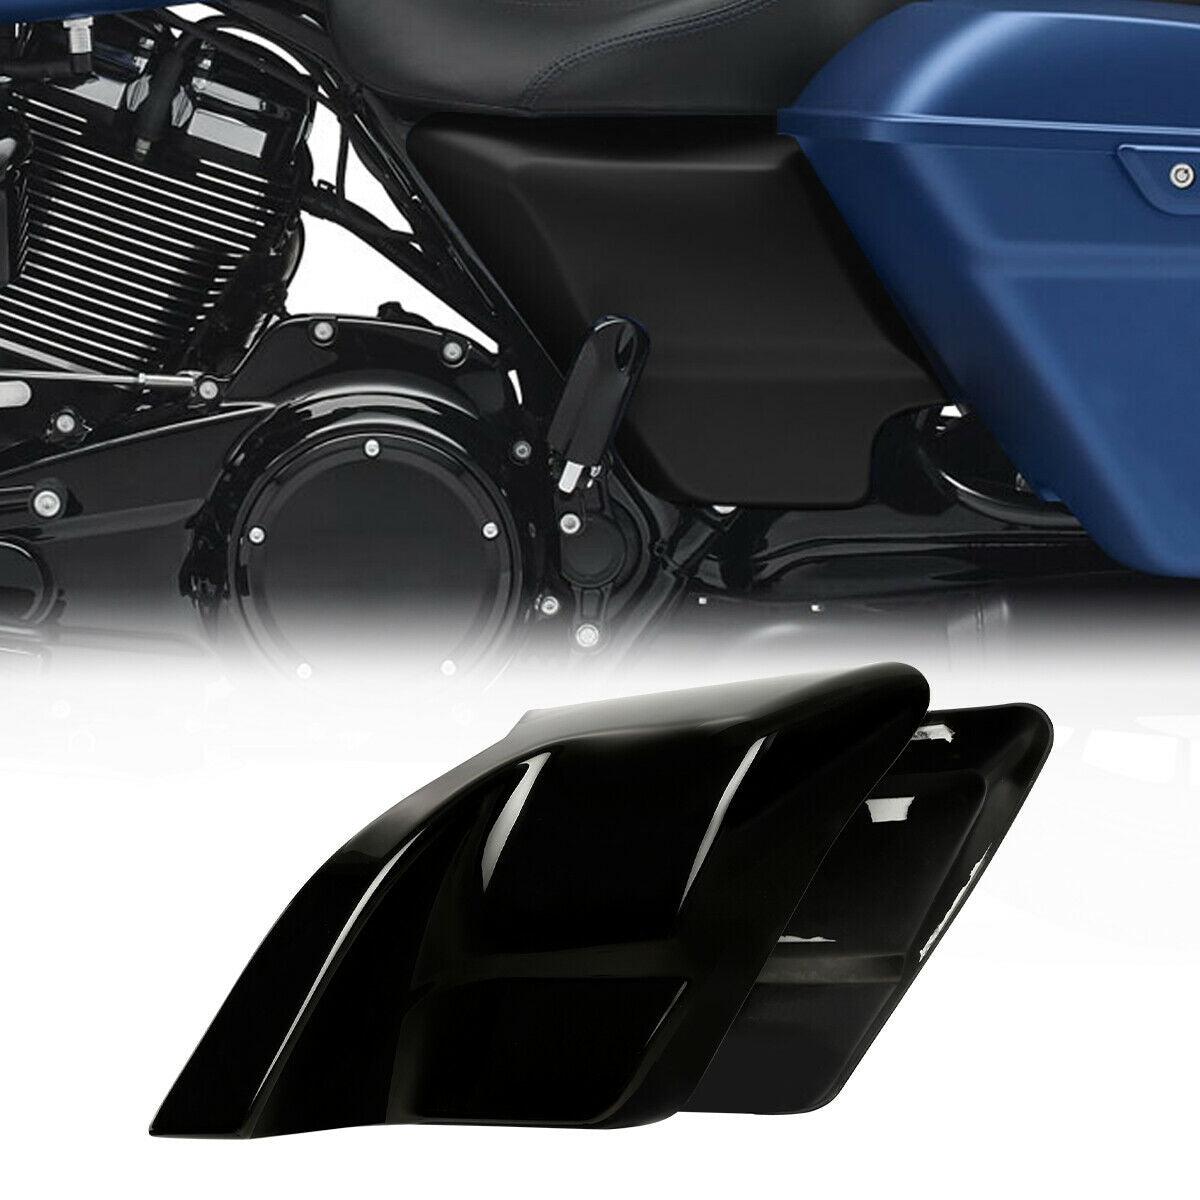 Black Stretched Side Cover Panel Fit For Harley Electra Street Road Glide 14-22 - Moto Life Products